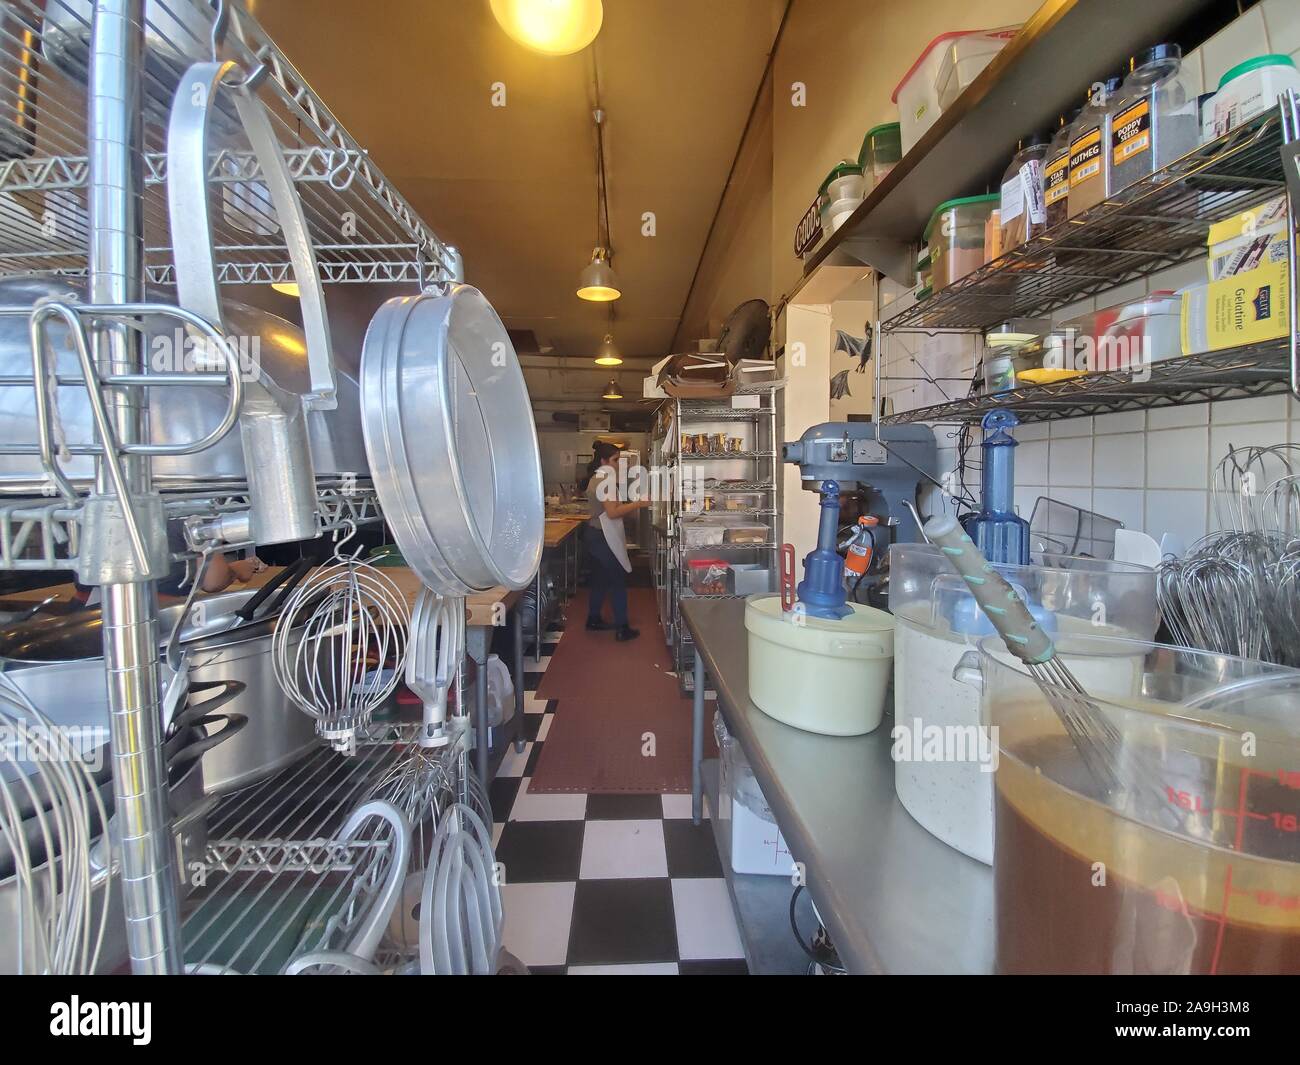 Wide angle of kitchen area at Tartine Bakery in the Mission District neighborhood of San Francisco, California, widely considered among the best bakeries in the world, October 6, 2019. () Stock Photo